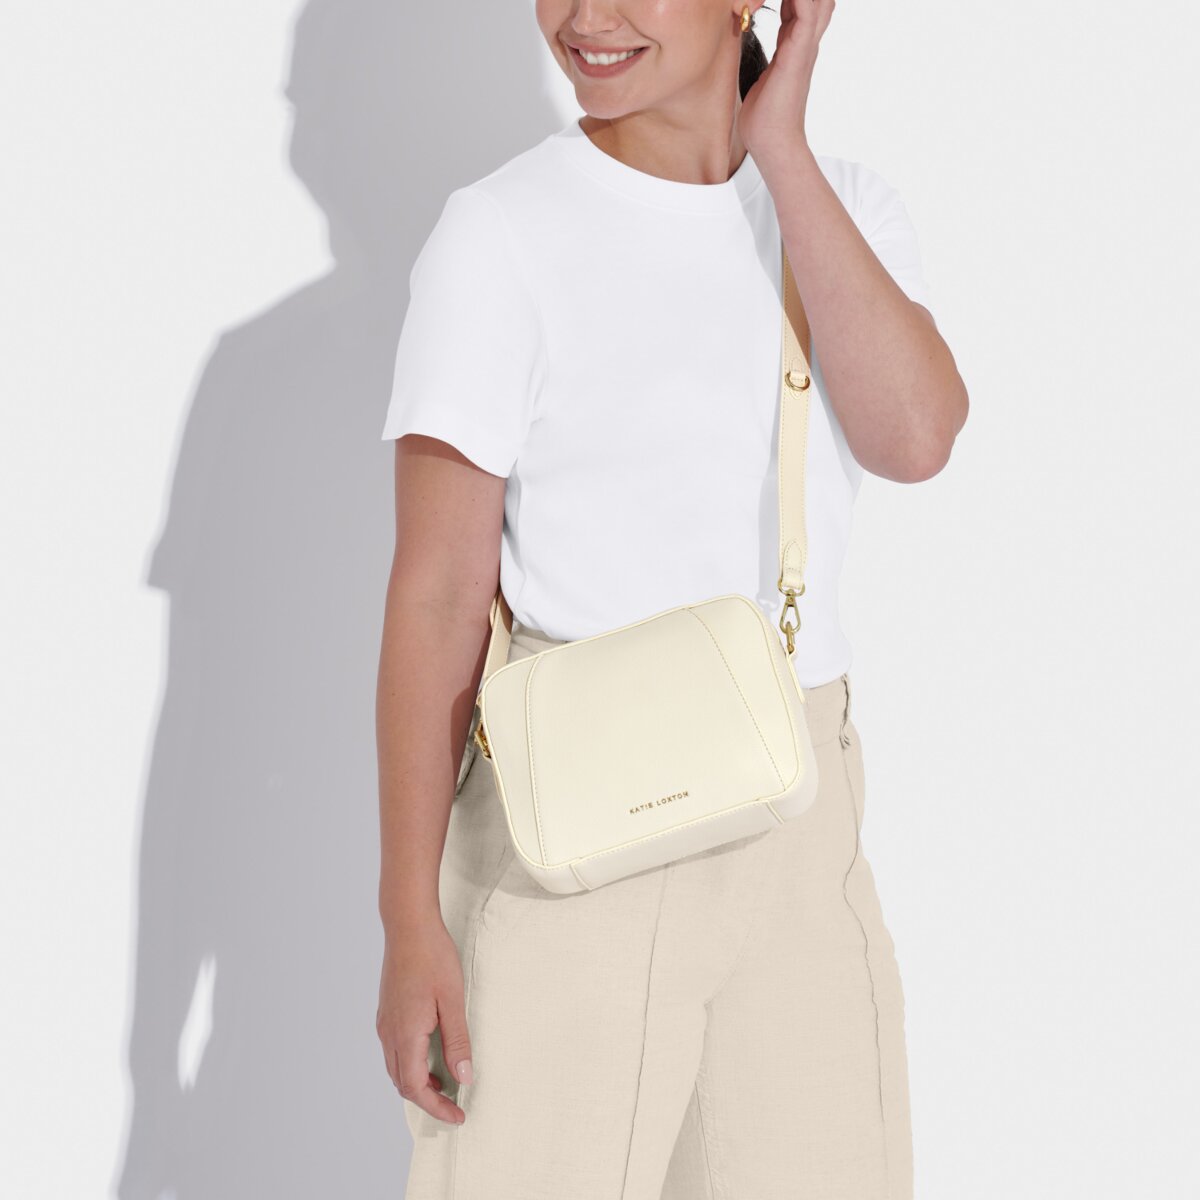 picture of a model wearing a white t-shirt and cream trousers wearing an off-white handbag in cross-body style